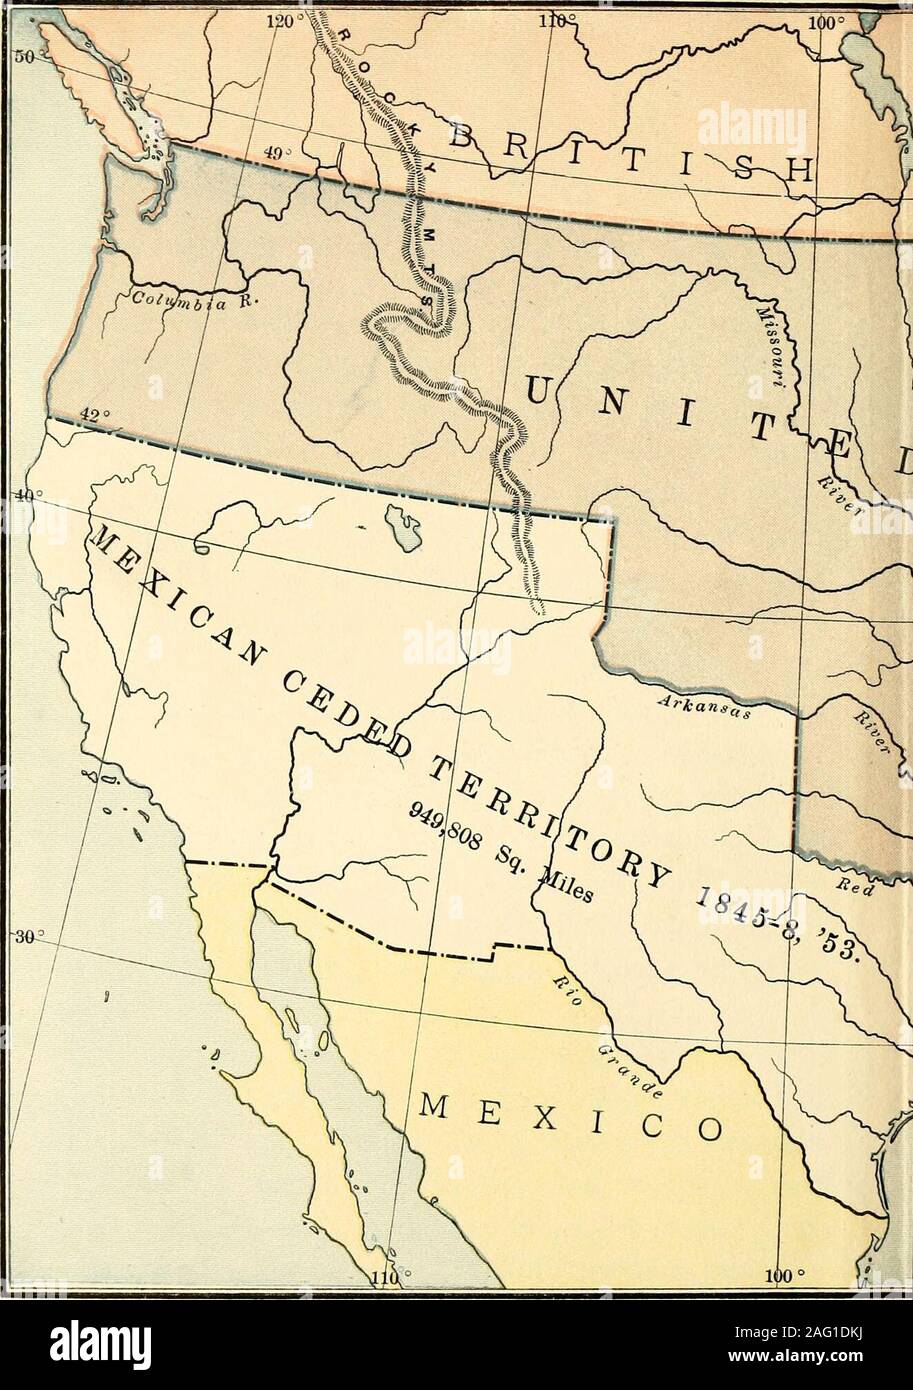 . A century of American diplomacy : being a brief review of the foreign relations of the United States, 1776-1876. Polk. There was everyreason to believe that Mexico was in earnest in itsnotice that the annexation would be held as an act ofwar, and a portion of the federal army under GeneralTaylor was ordered to occupy part of the territoryclaimed by Texas adjoining Mexico. Texas never hav-ing been recognized as an independent state by Mexico,no boundary line had been fixed and it was a subjectof dispute. Texan settlements had not extended be-yond the Nueces River, and between that river and t Stock Photo